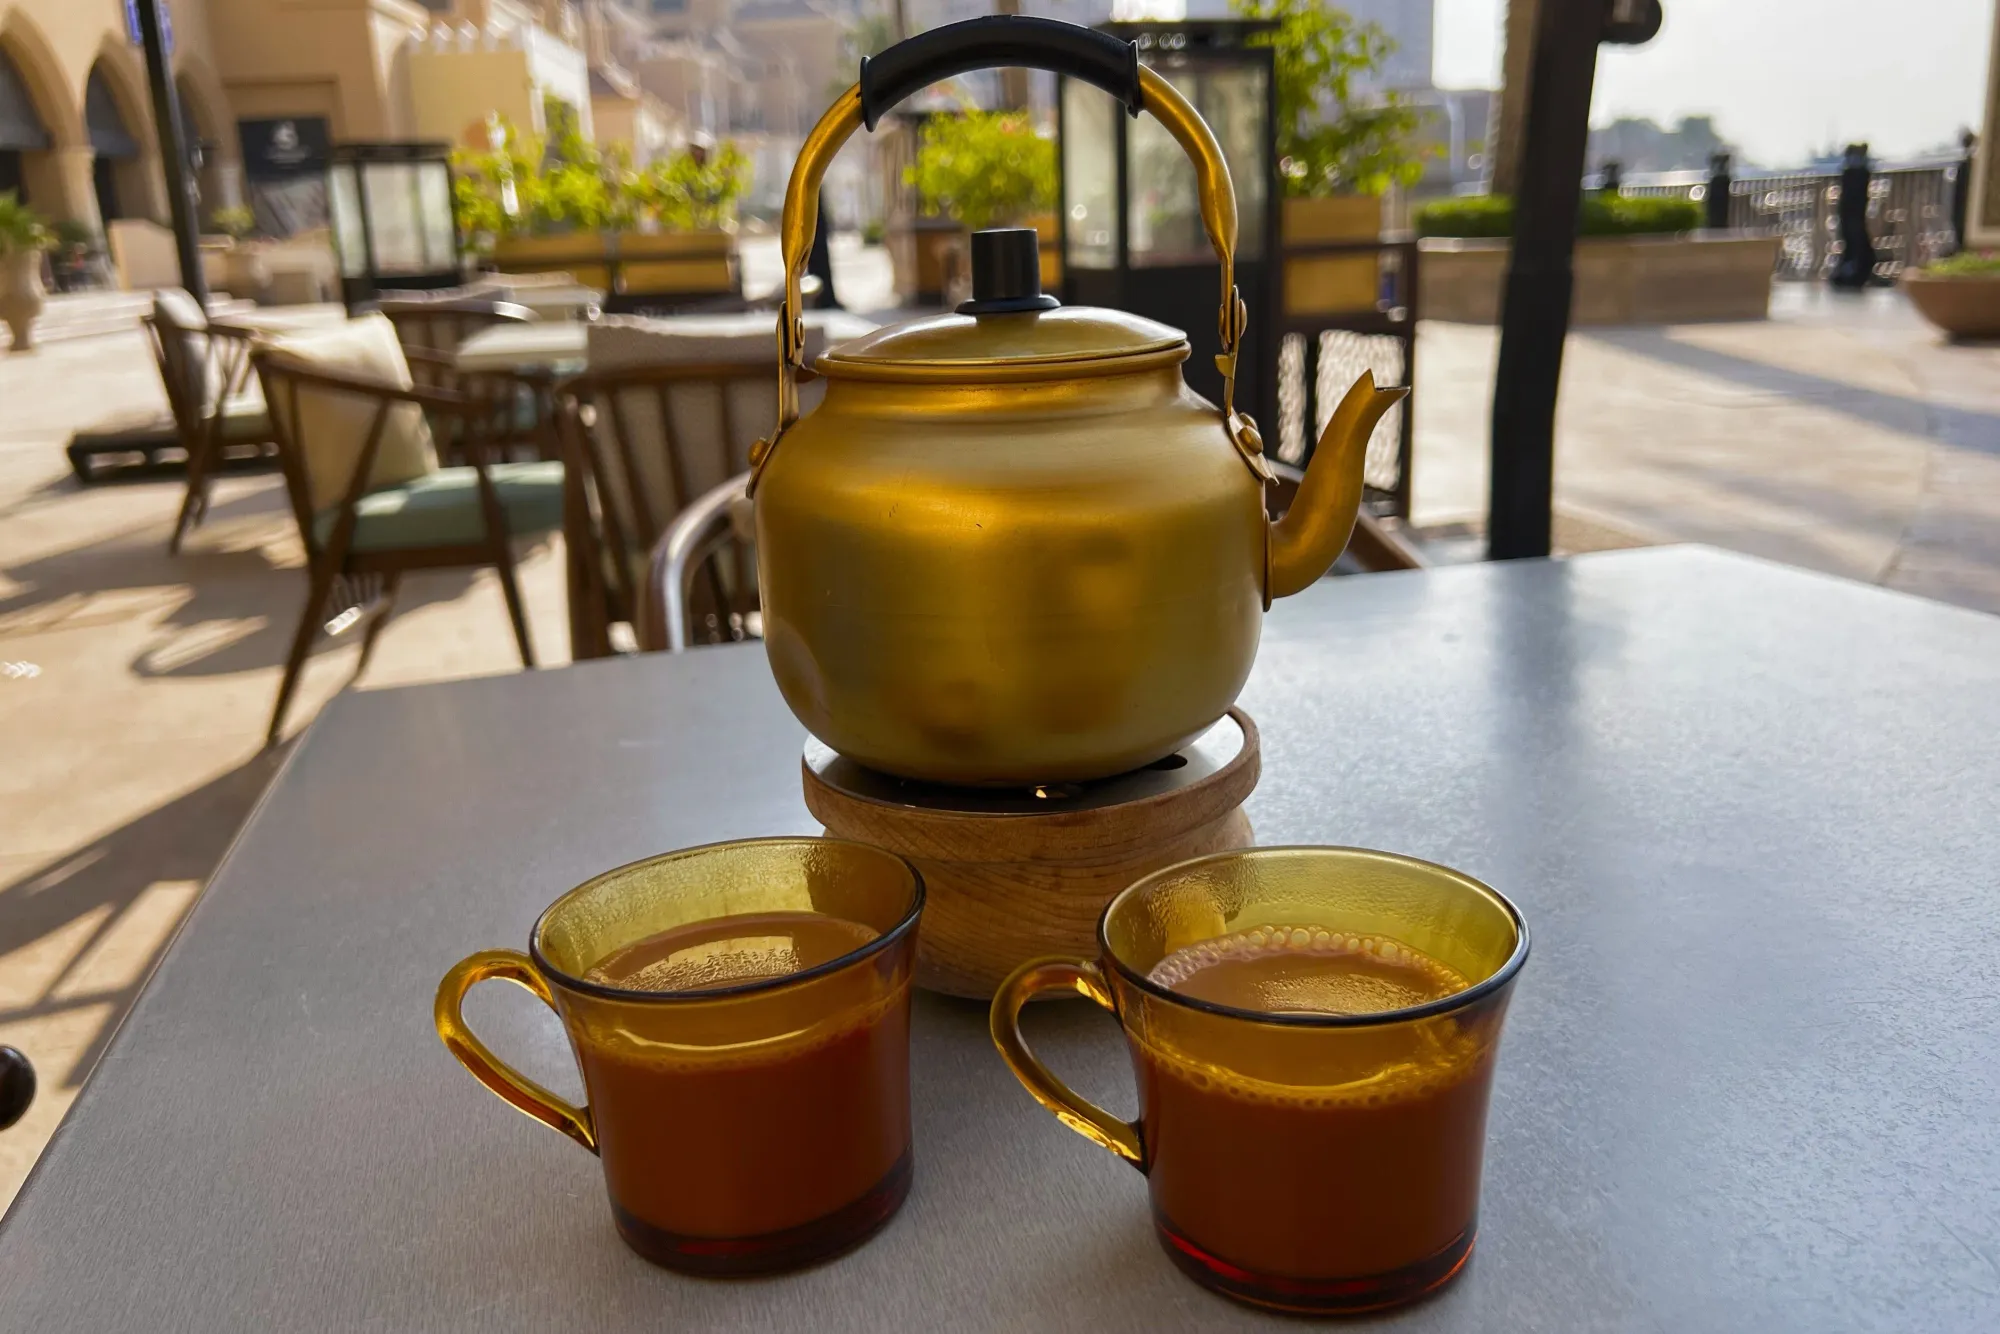 Gold teapot with two cups filled with karak tea